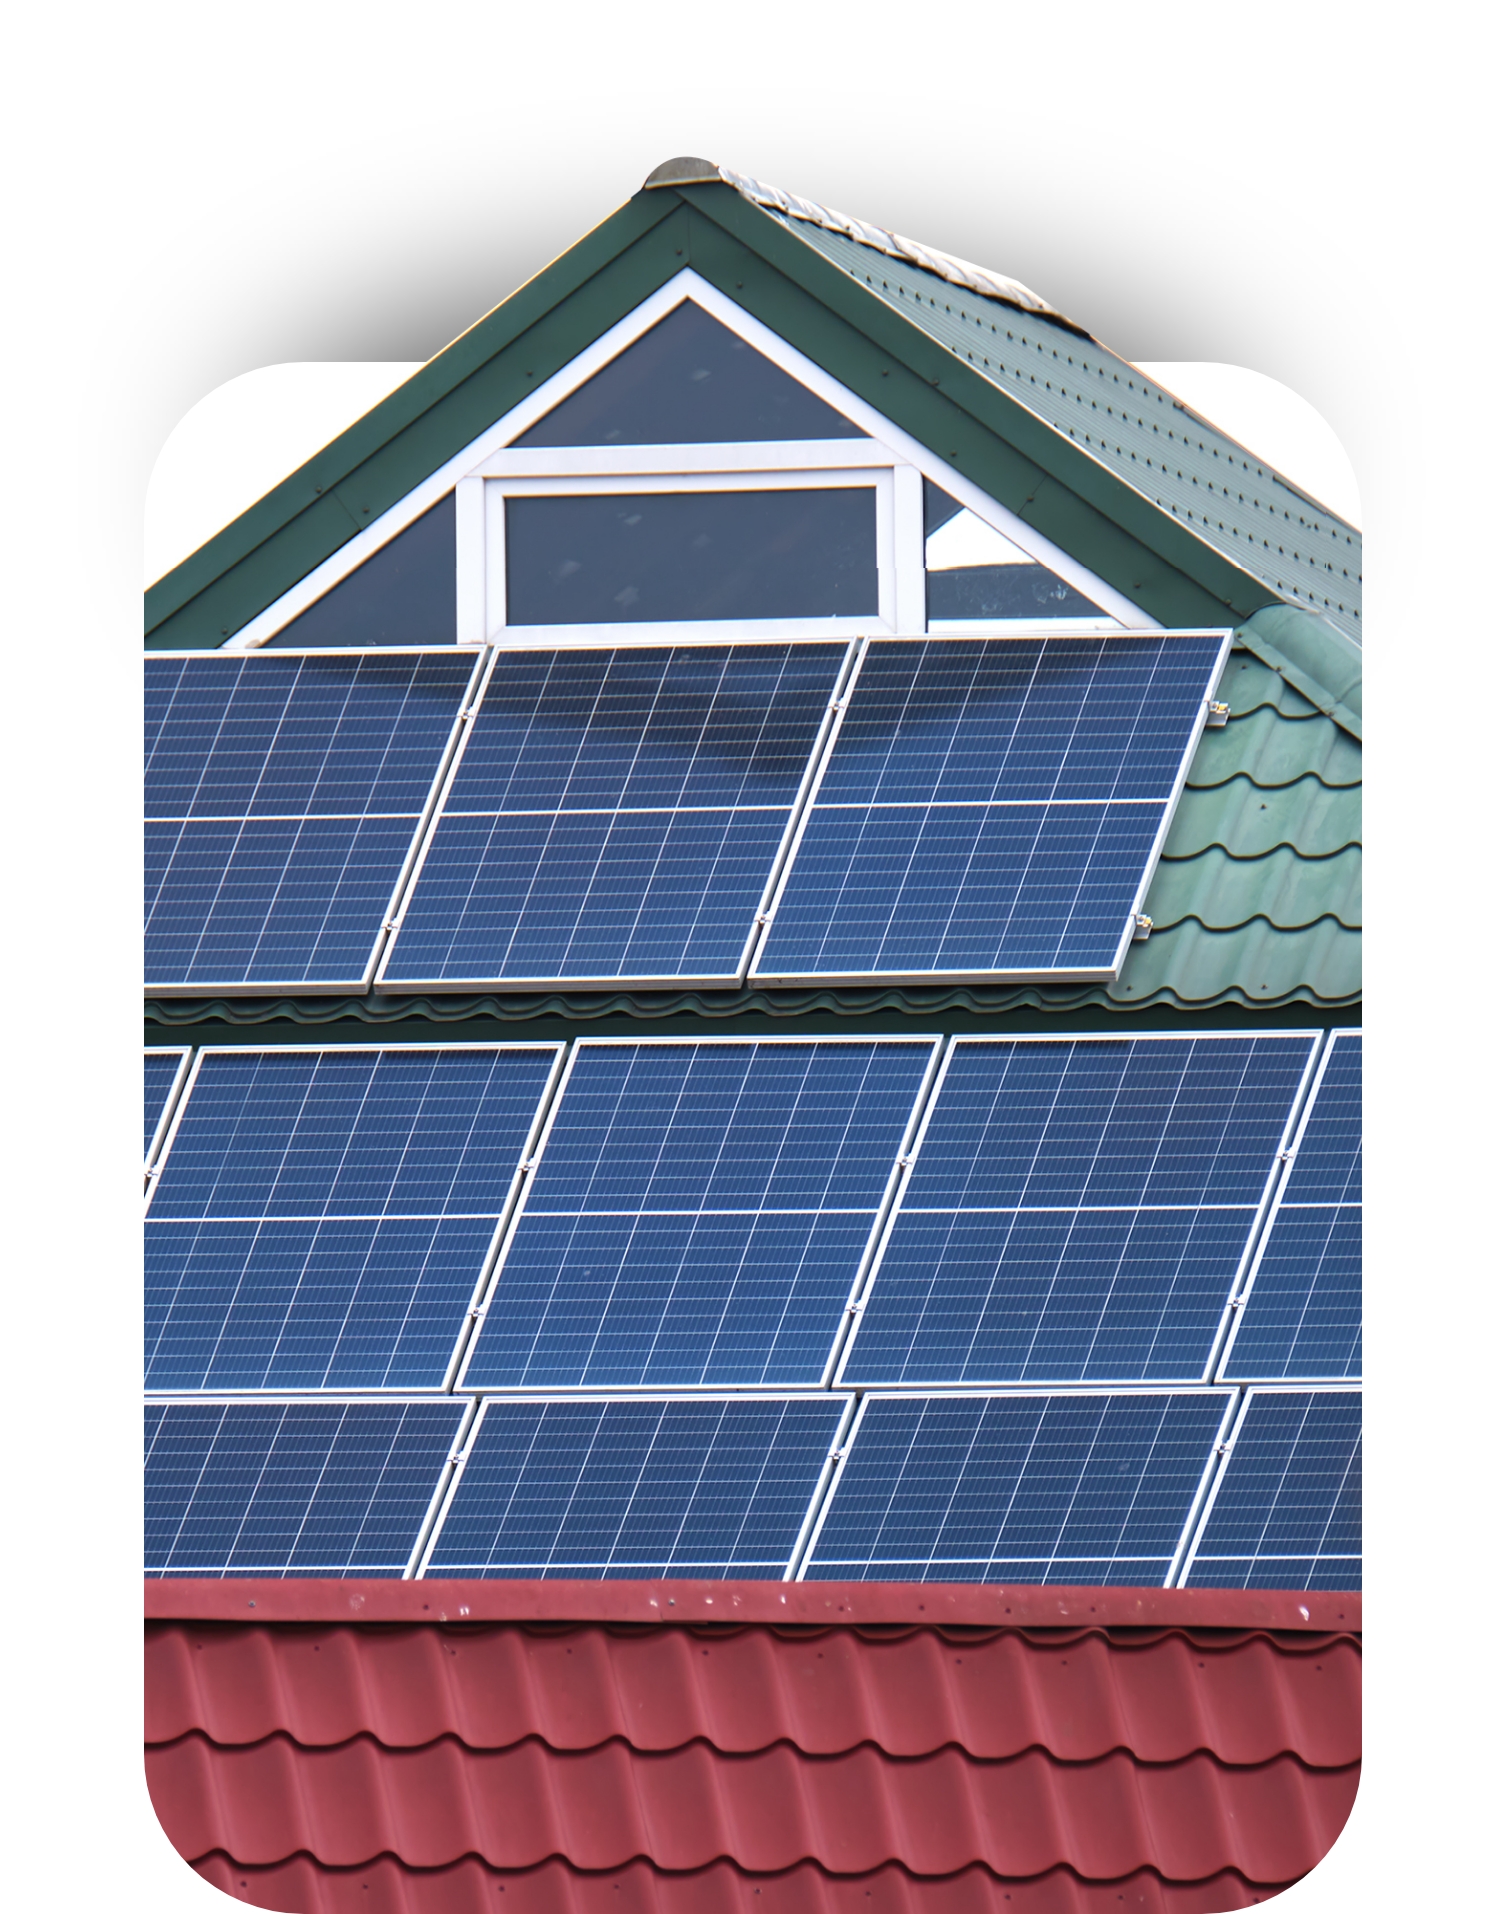 As one of the best solar companies serving Castle Rock, CO, we can customize a solar power system to save you money on your electric bill by making solar panels worth the investment.